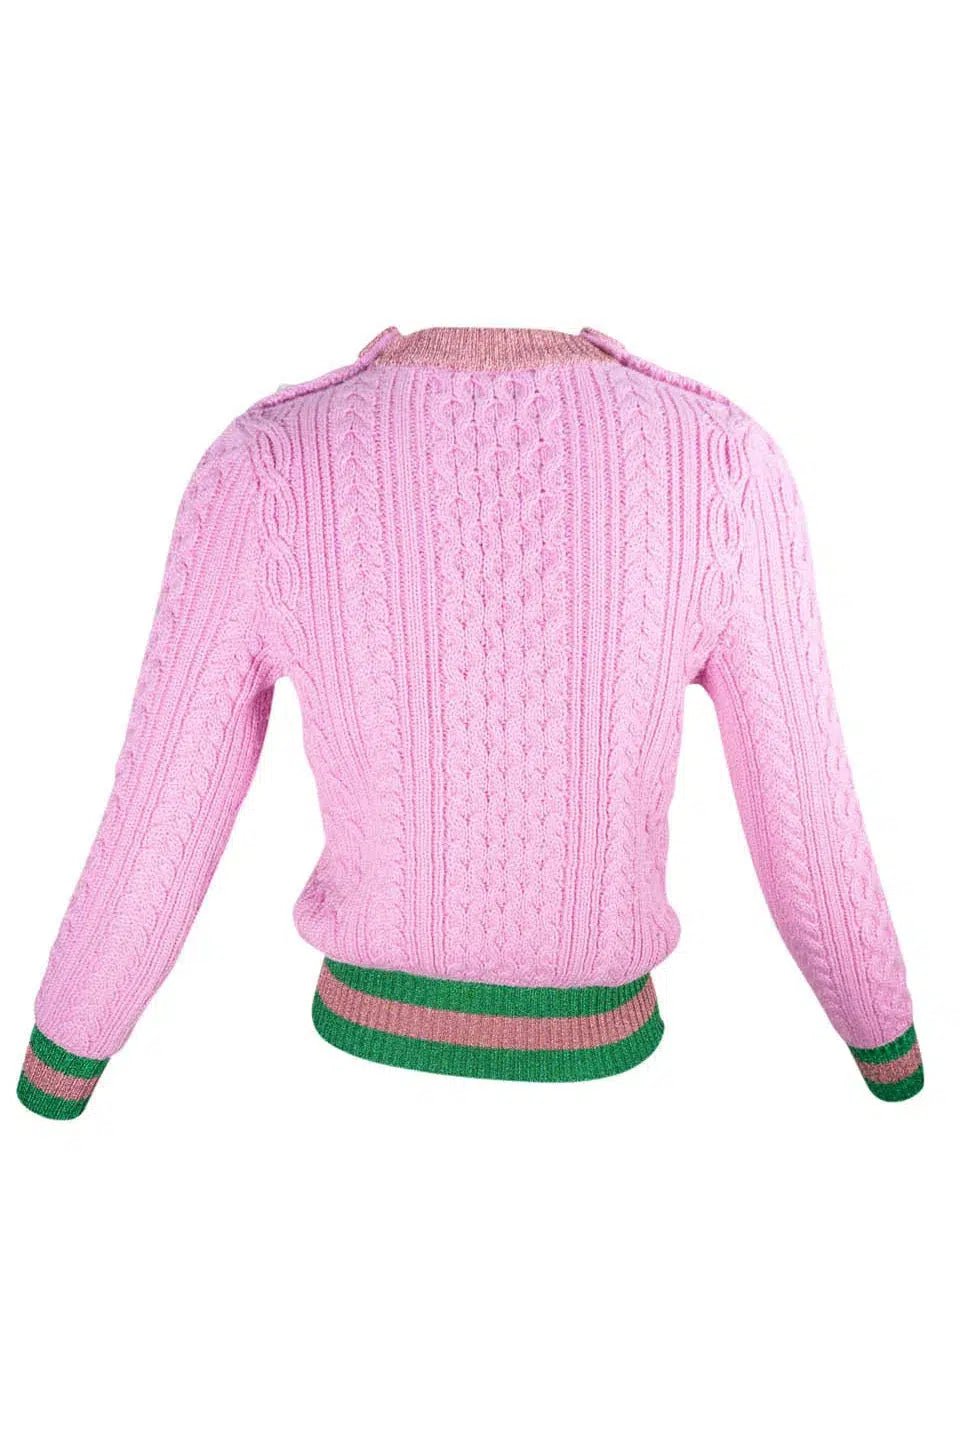 Gucci by Alessandro Michel Pink Knit Sweater with Pearl GG Buttons Size XS